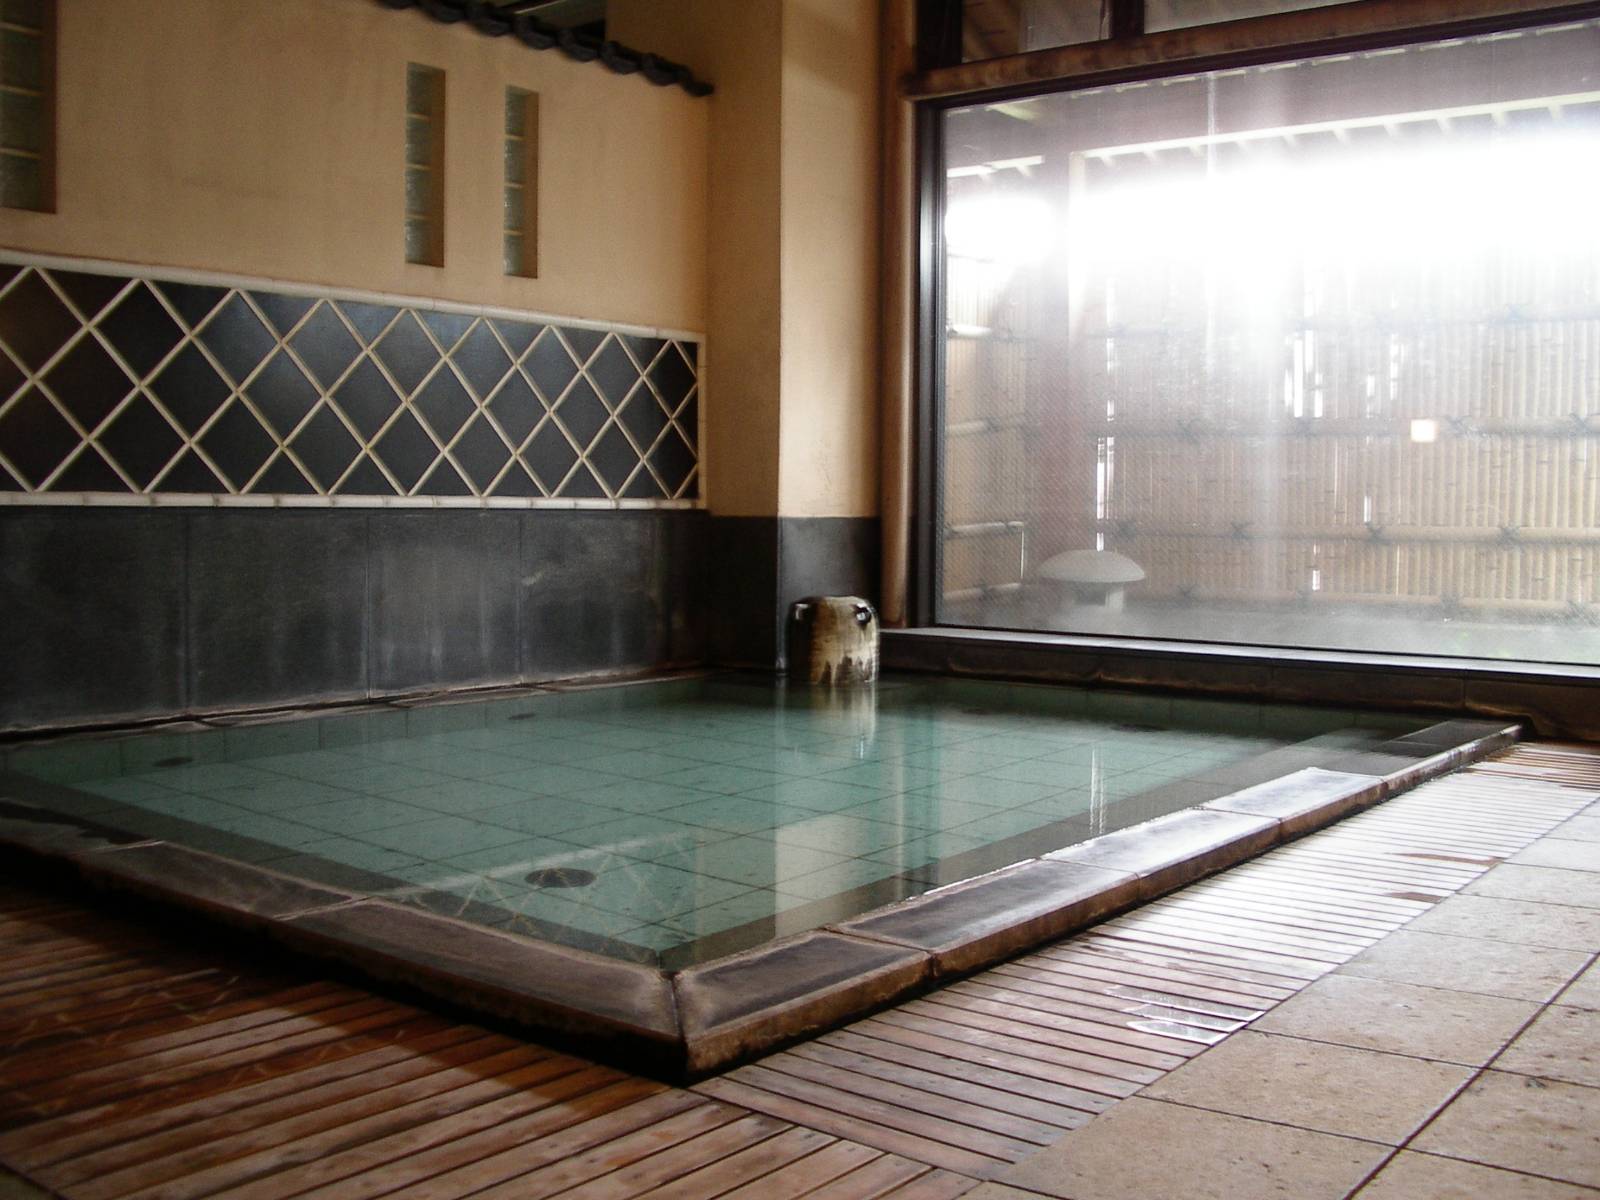 Large onsen bath filled with natural hotspring water.